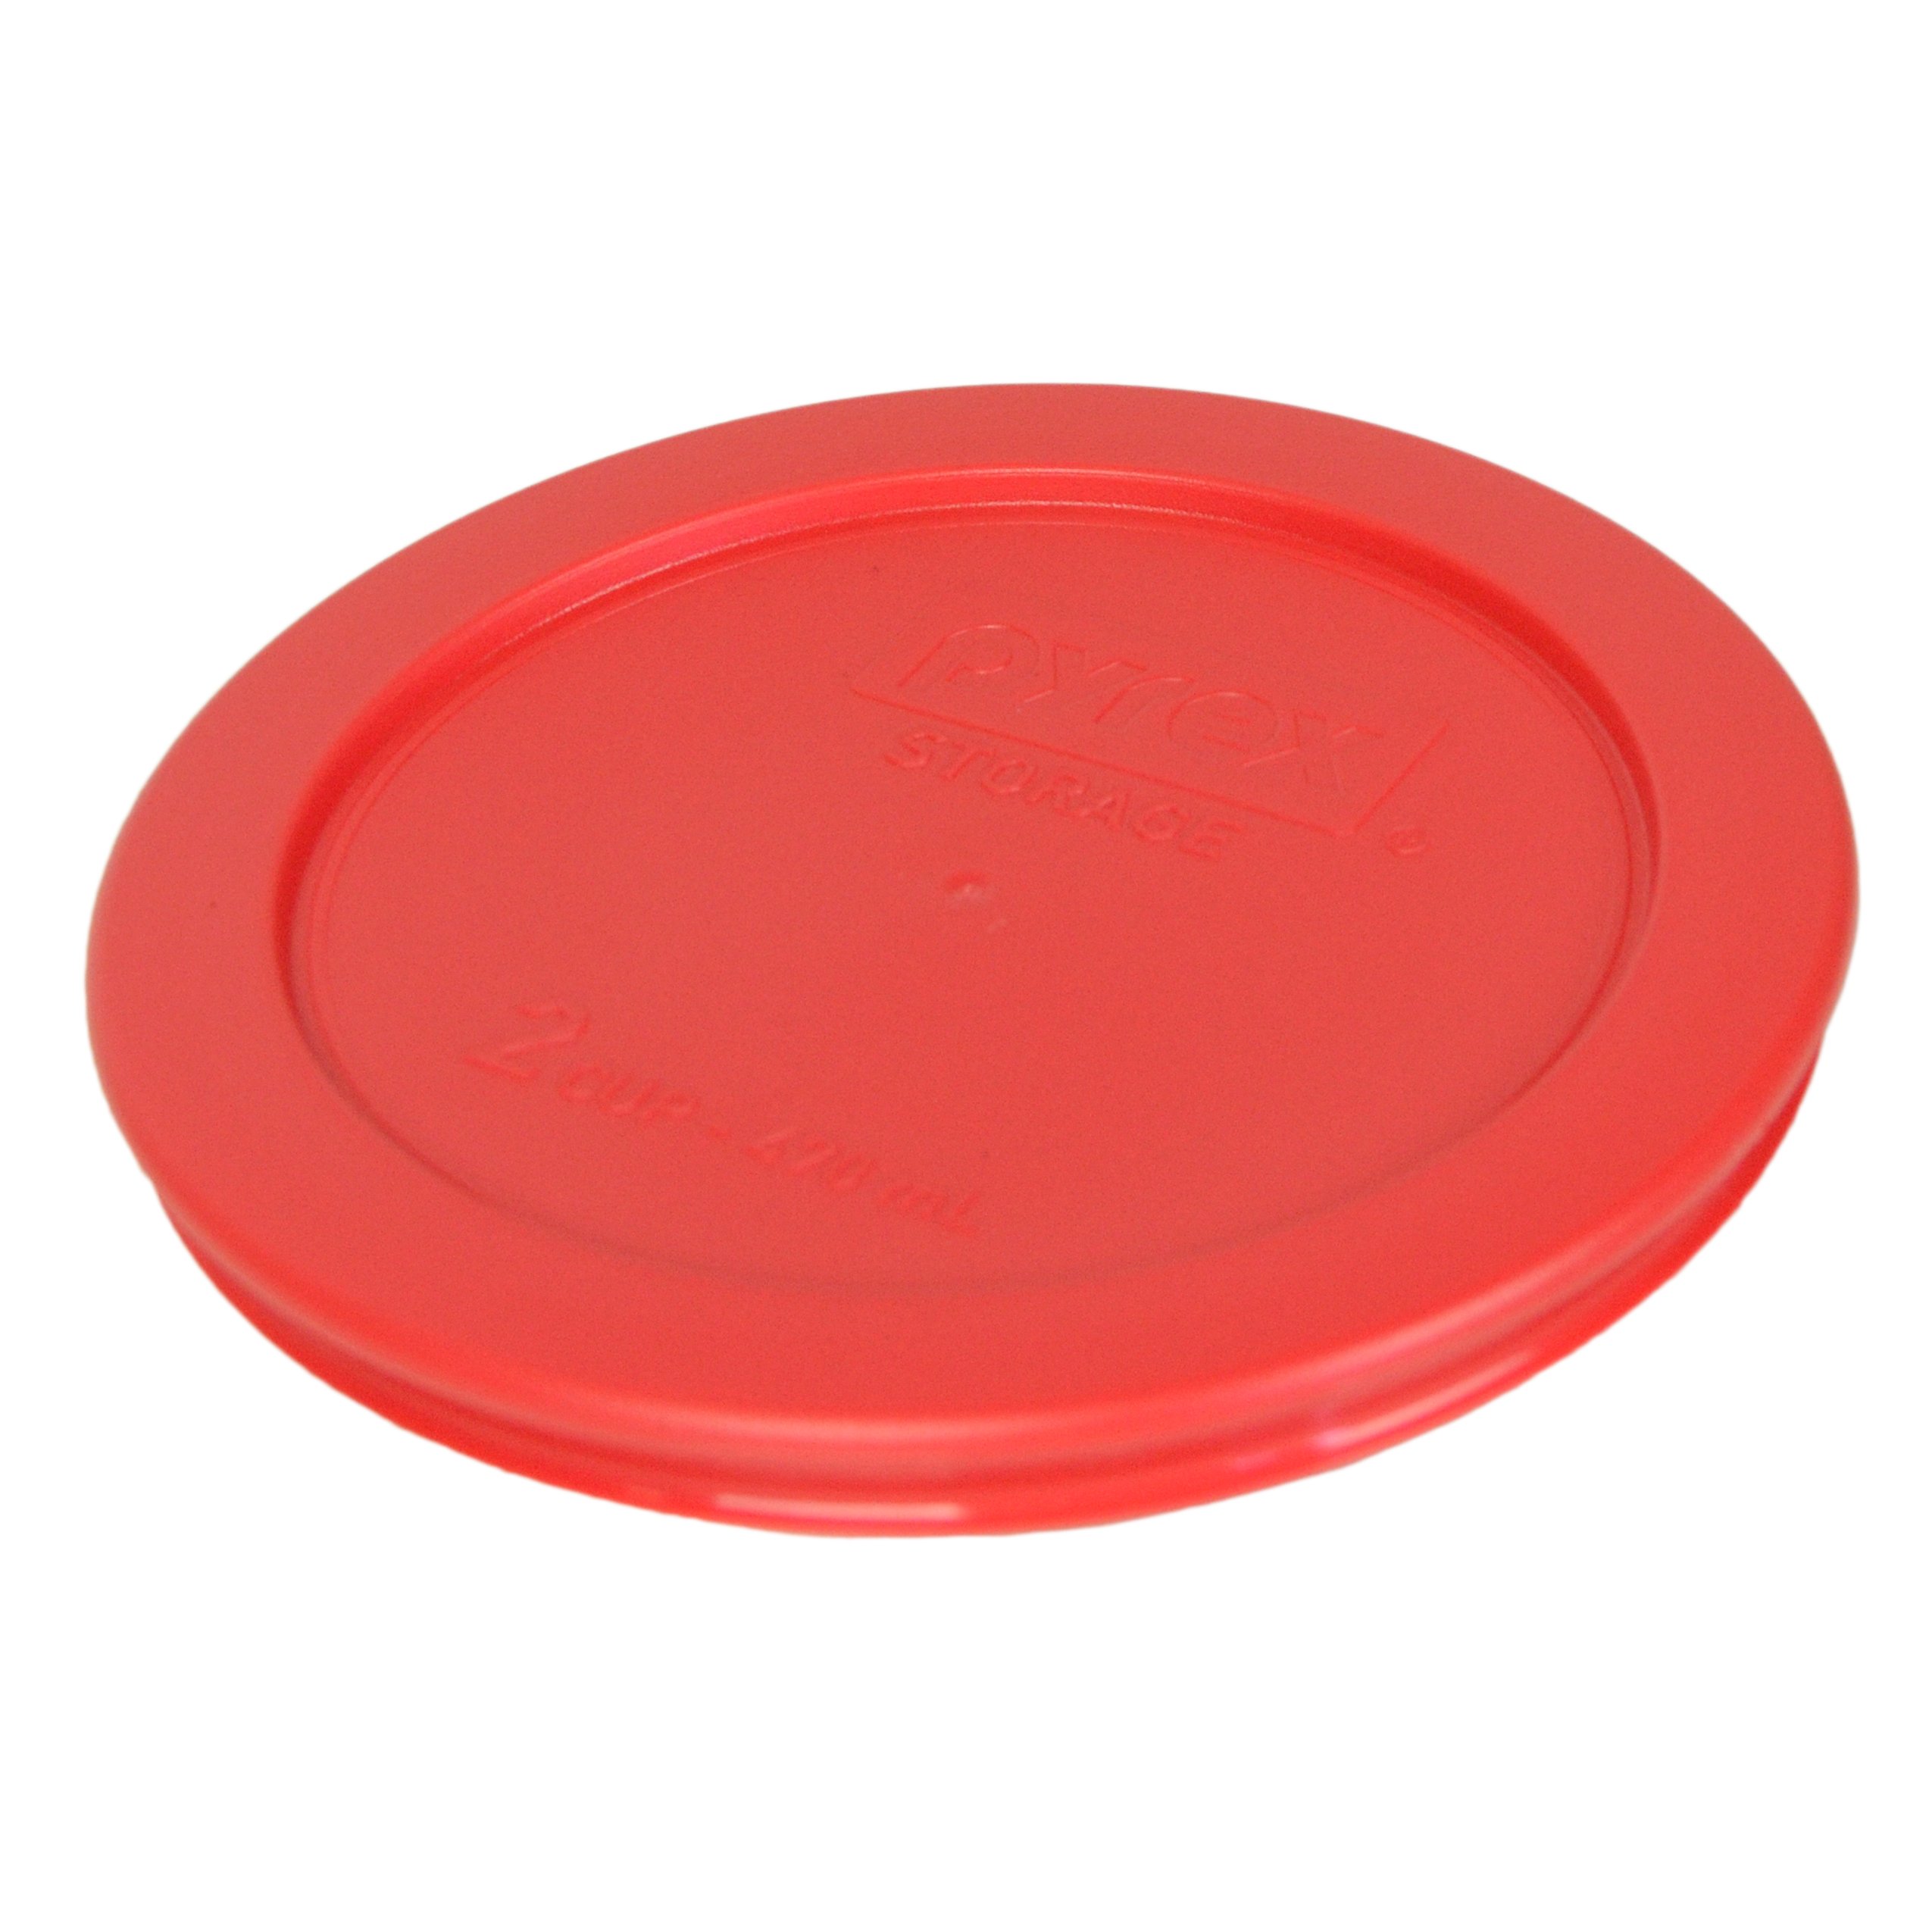 Pyrex 7200-PC 2-Cup Red Replacement Food Storage Lid - Made in the USA